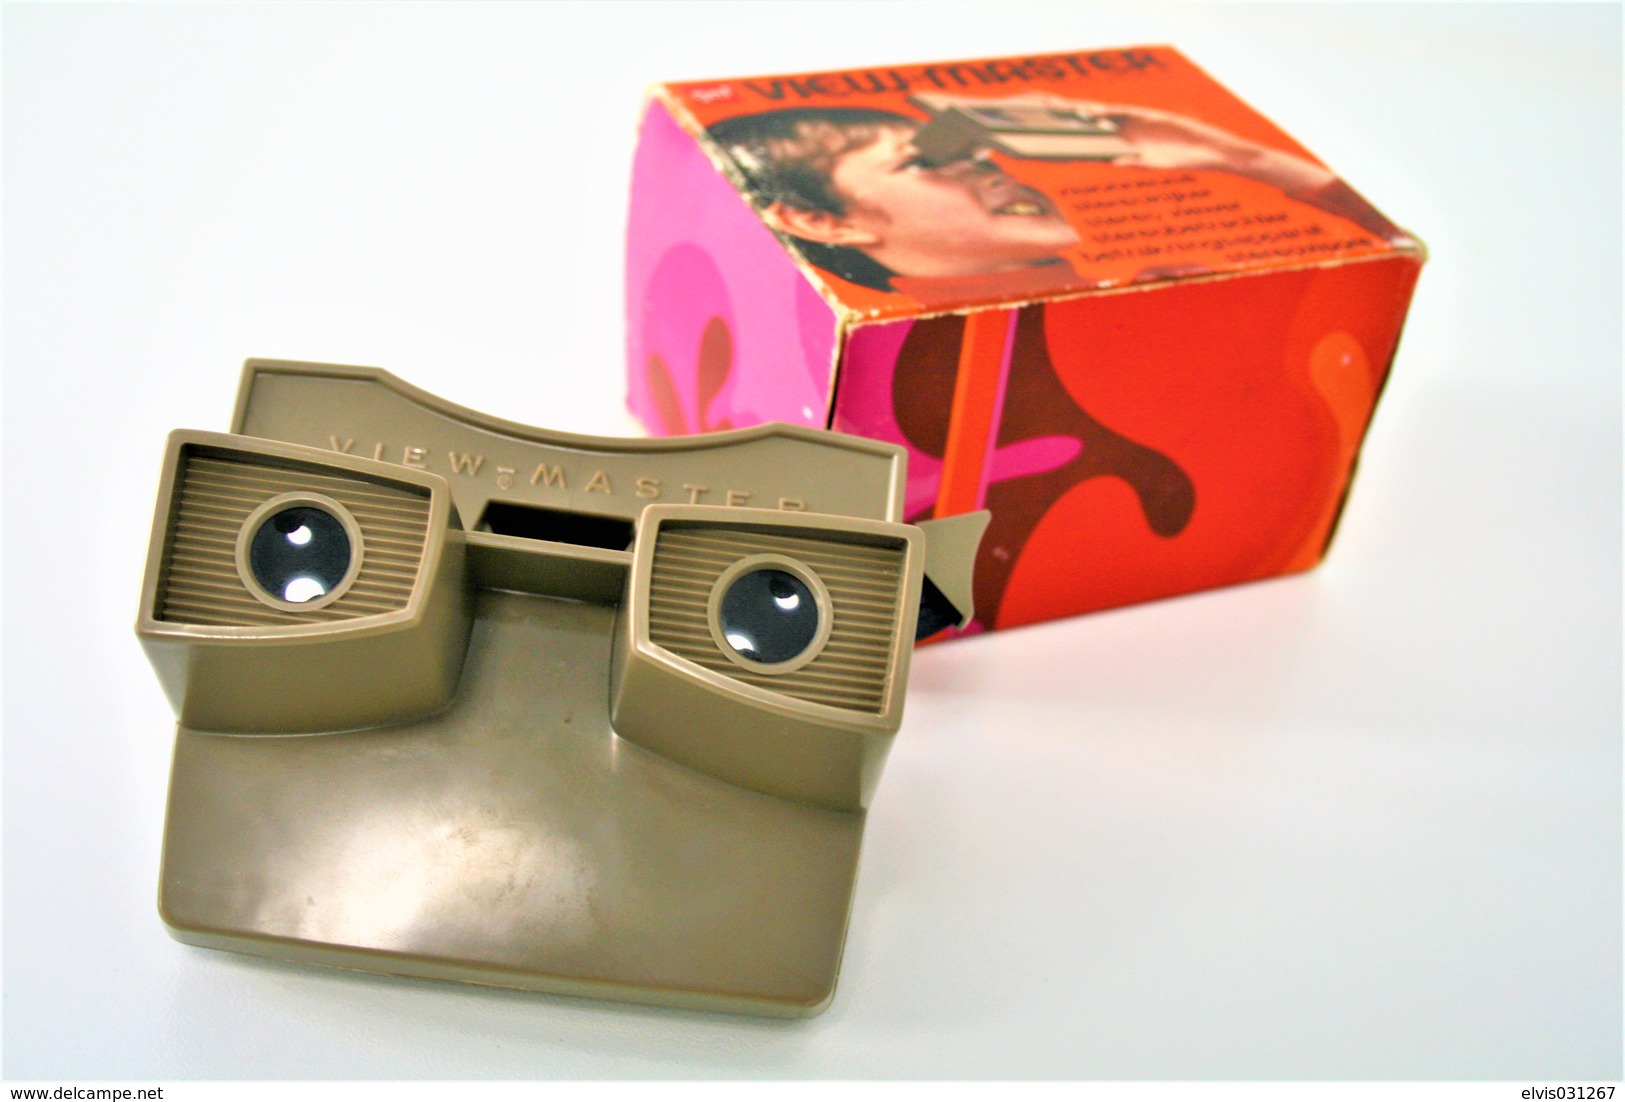 VIEW-MASTER Vintage : GAF View-master With Original Box - Made In Belgium - Original - Reels - Viewmaster - Stereoviewer - Visionneuses Stéréoscopiques